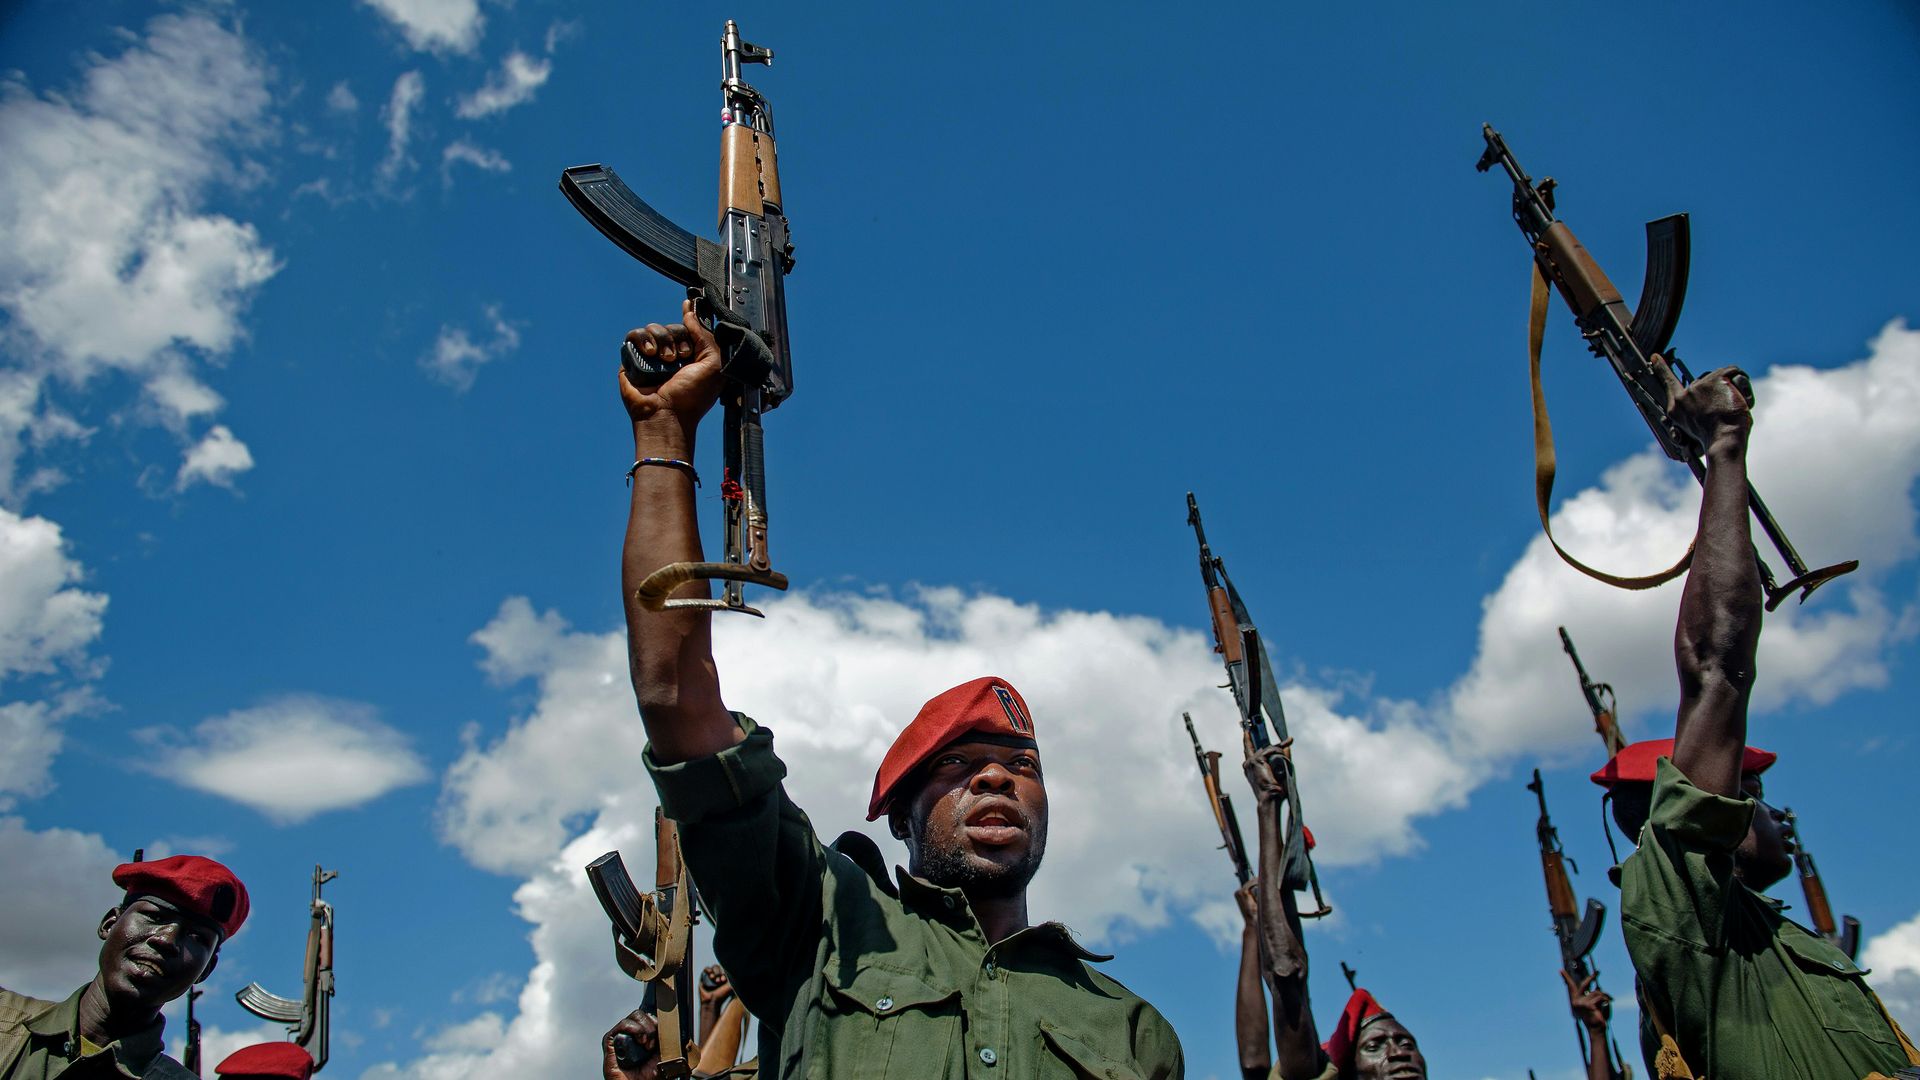 Sudan People's Liberation Army (SPLA) soldiers raise their rifles.